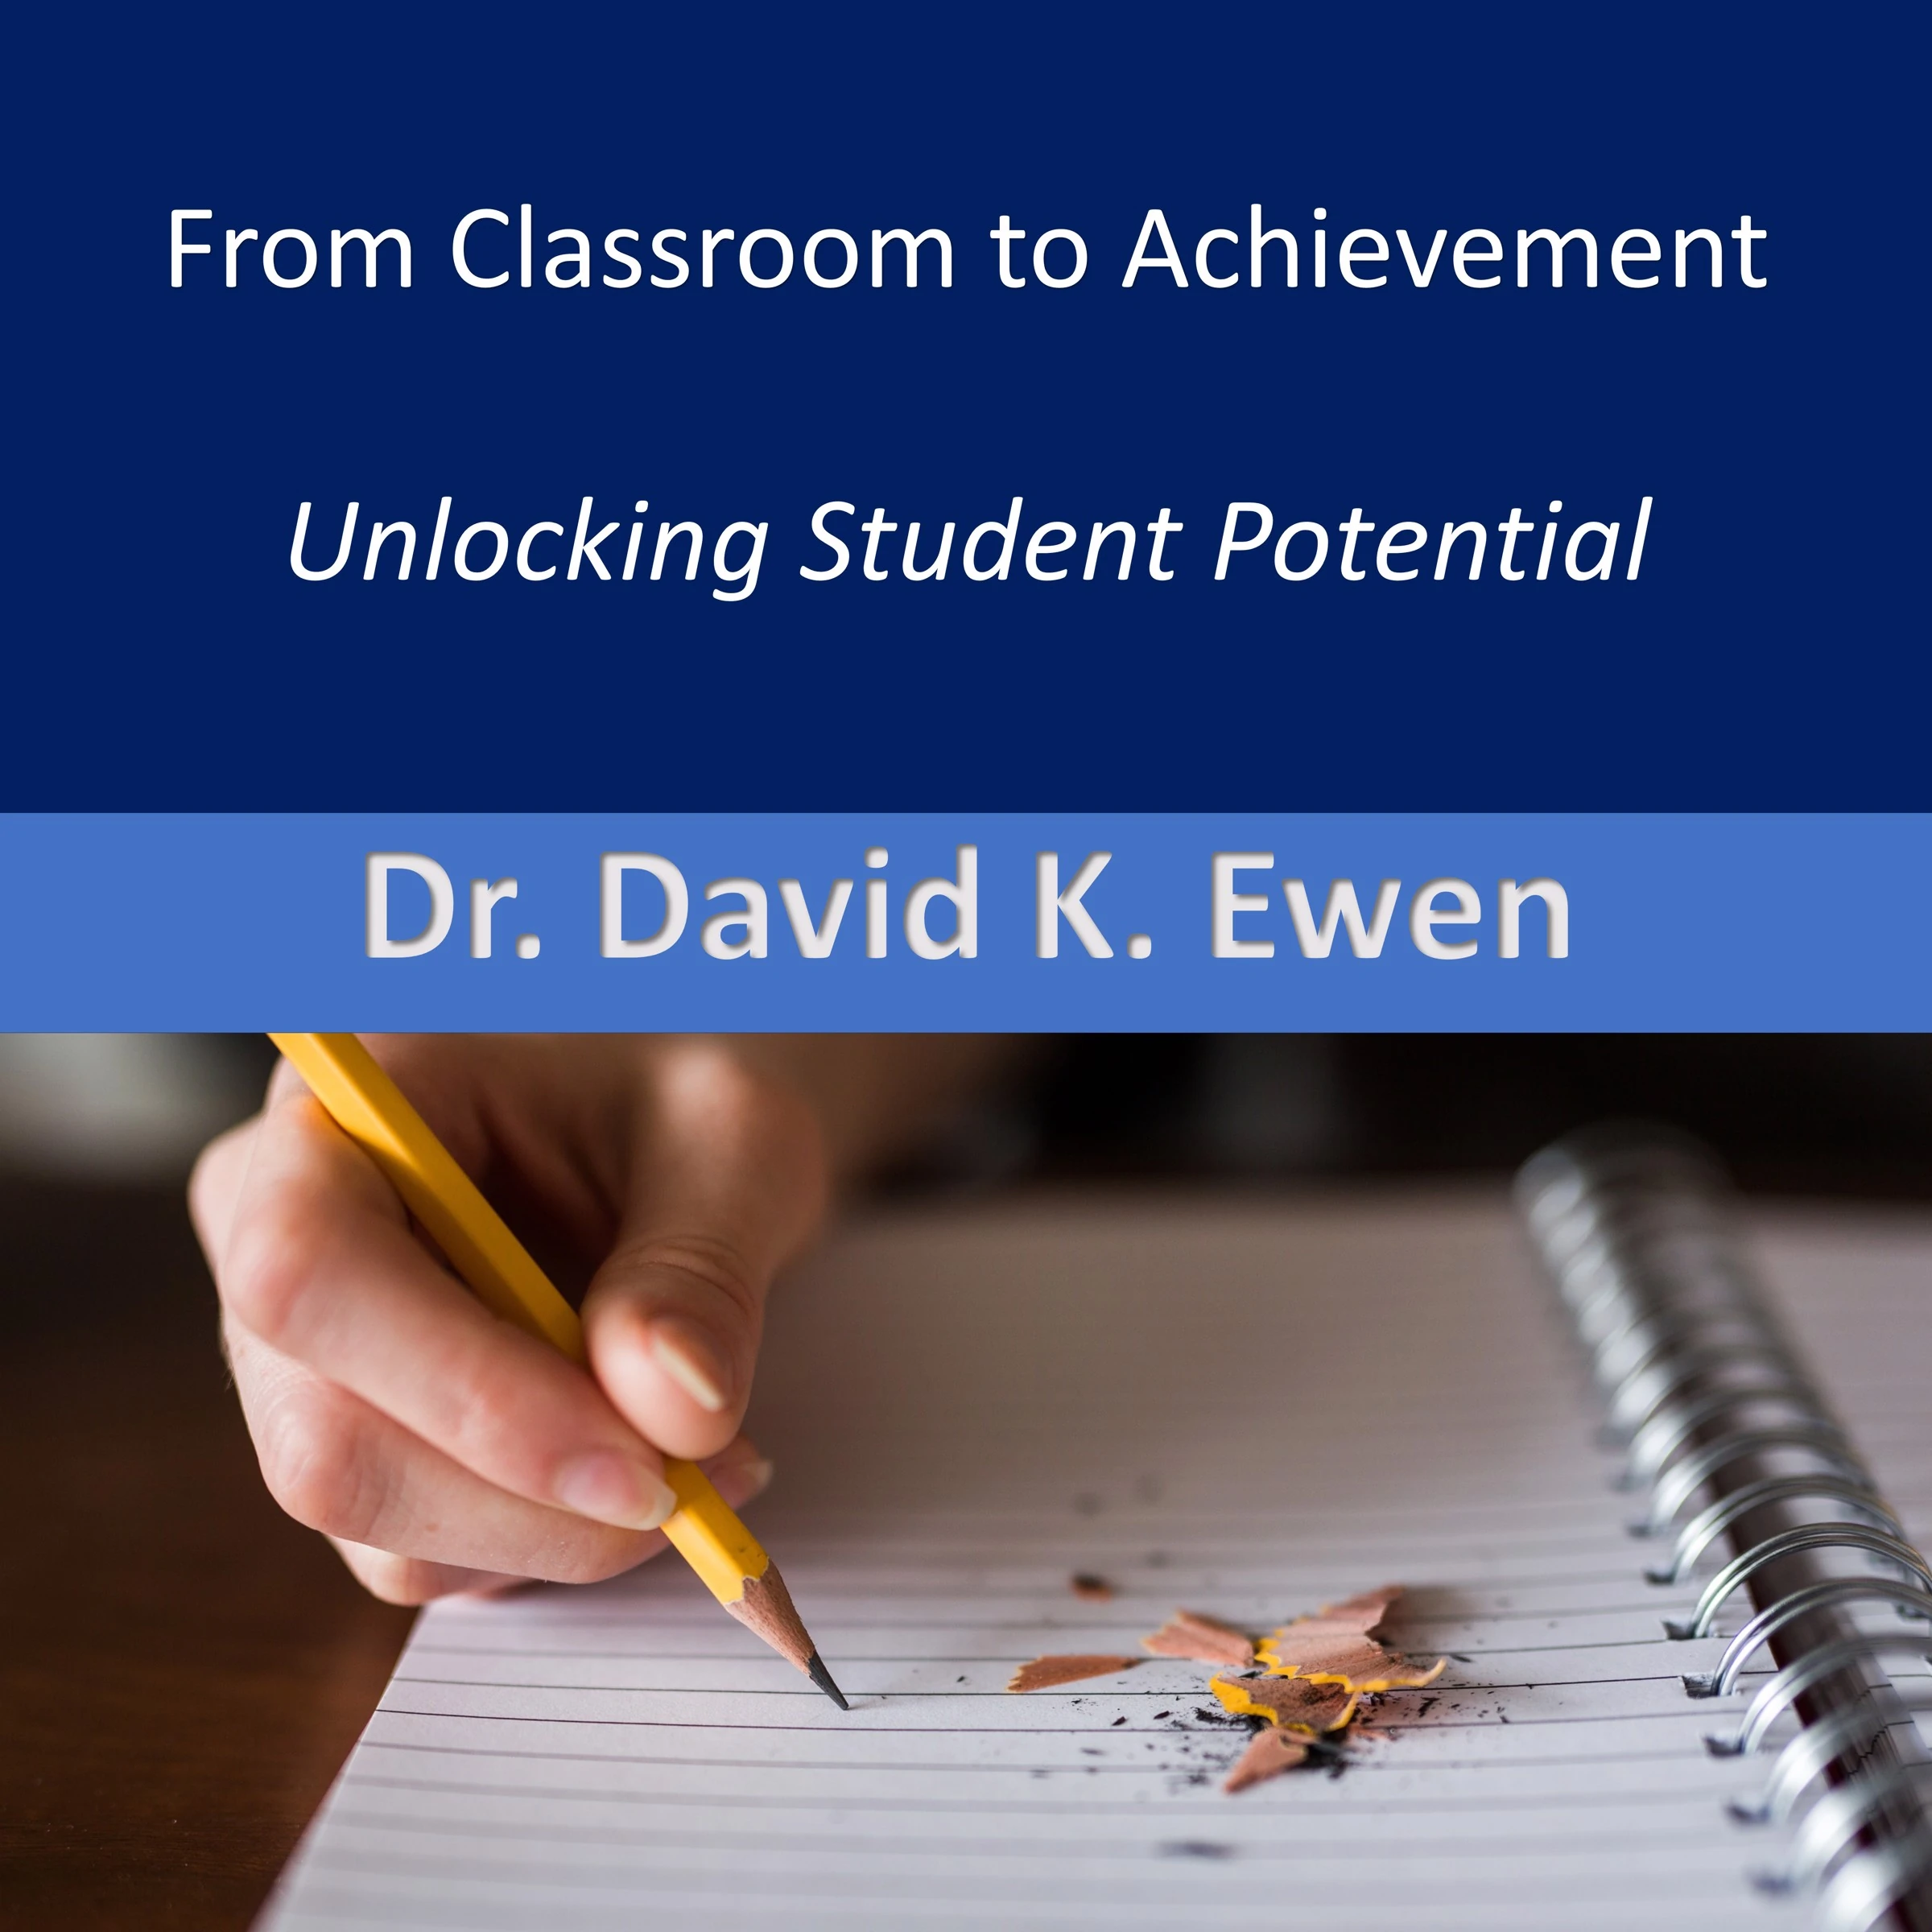 From Classroom to Achievement by Dr. David K. Ewen Audiobook